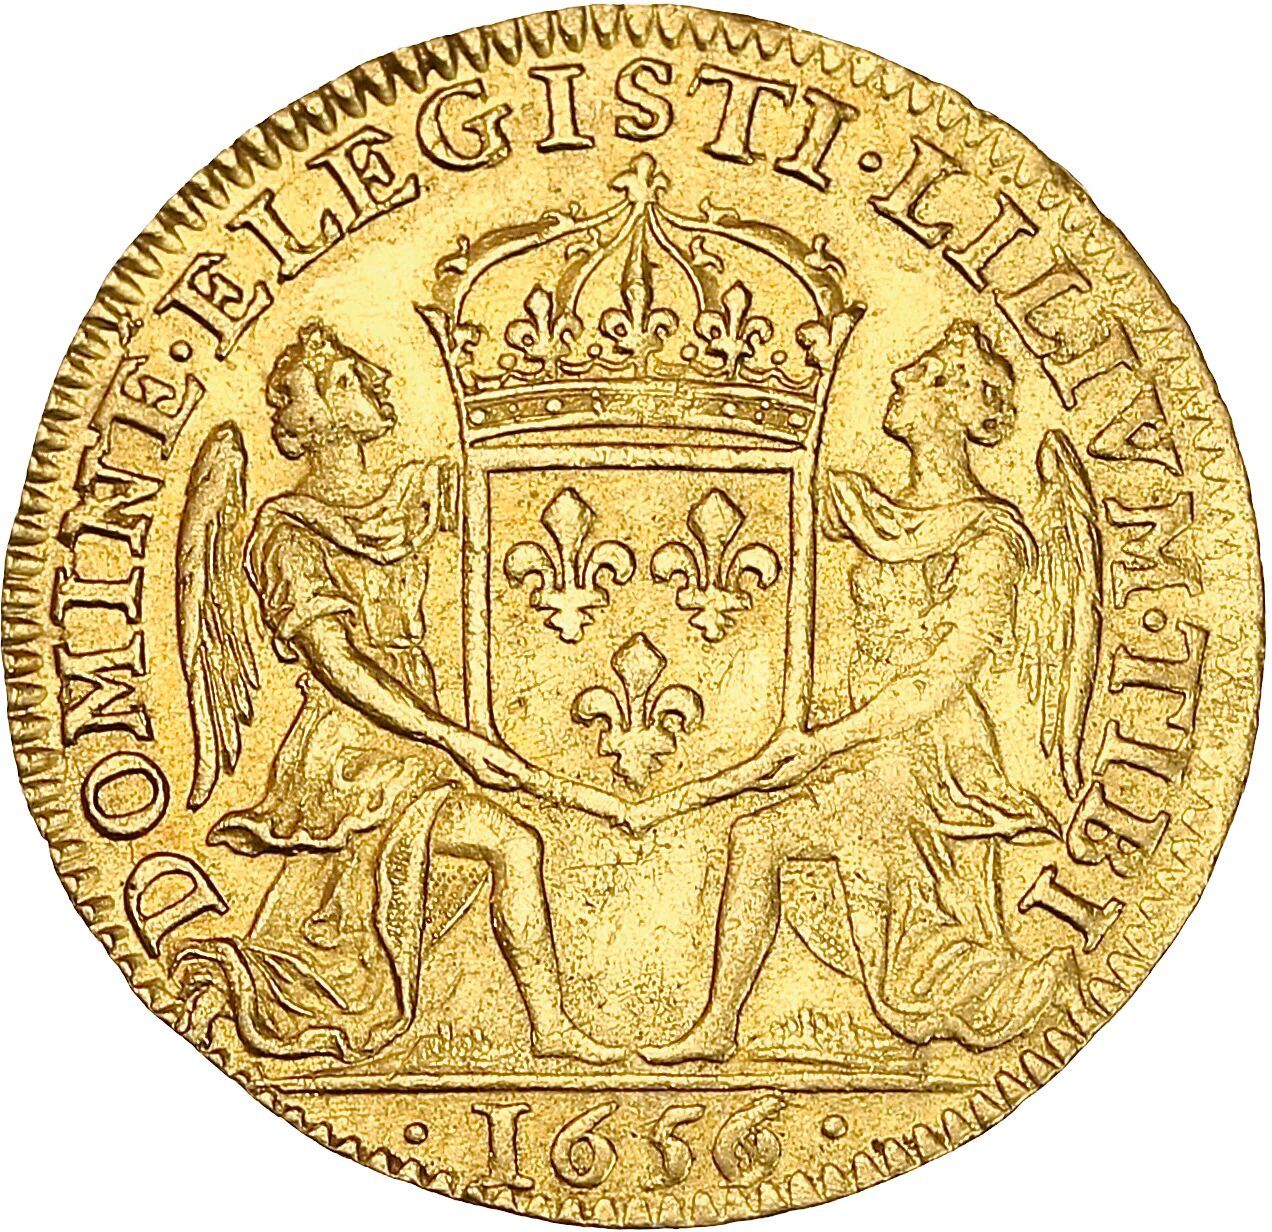 Null LOUIS XIV (1643-1715)
Golden lily. 1656. Paris. 4,05 g.
Cross formed of fou&hellip;